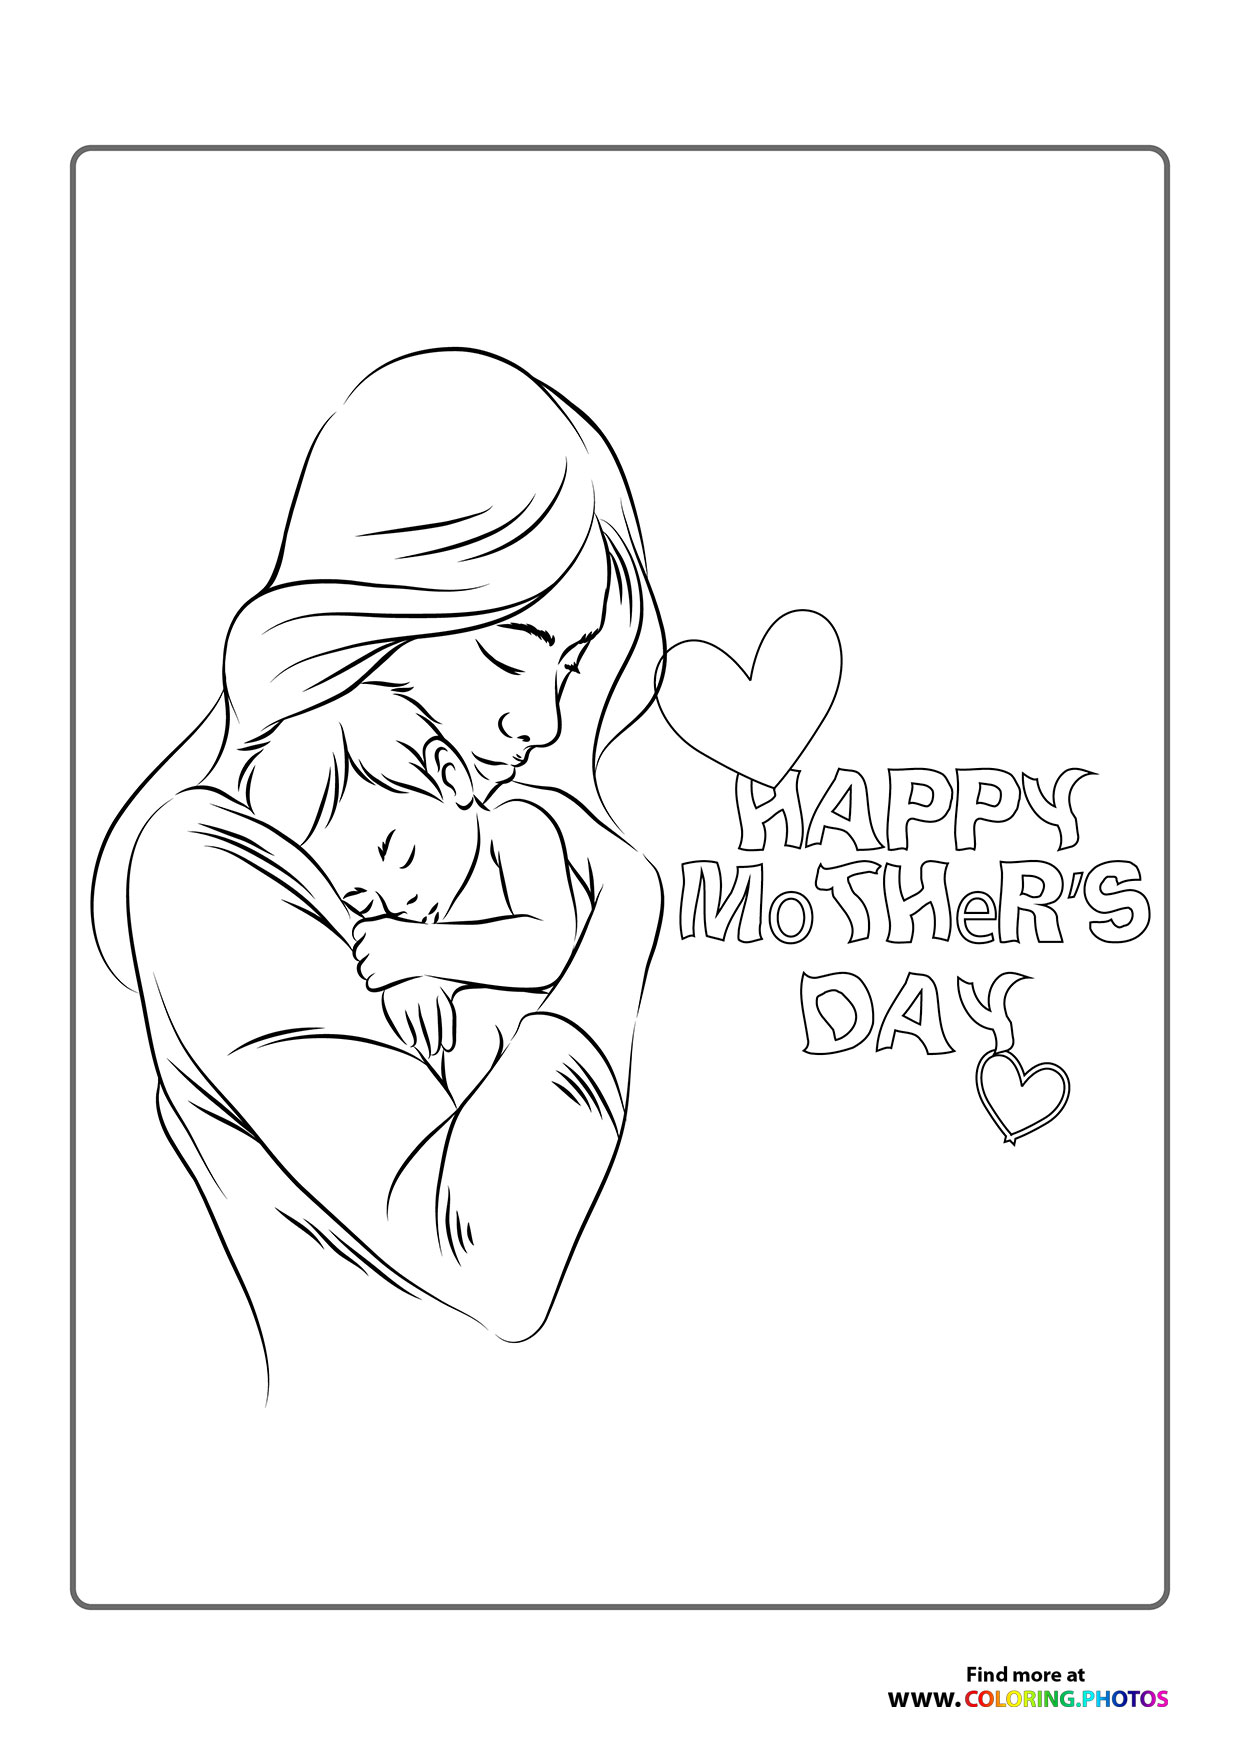 Mothers Day Coloring Pages For Kids 100 Free To Print Or Download